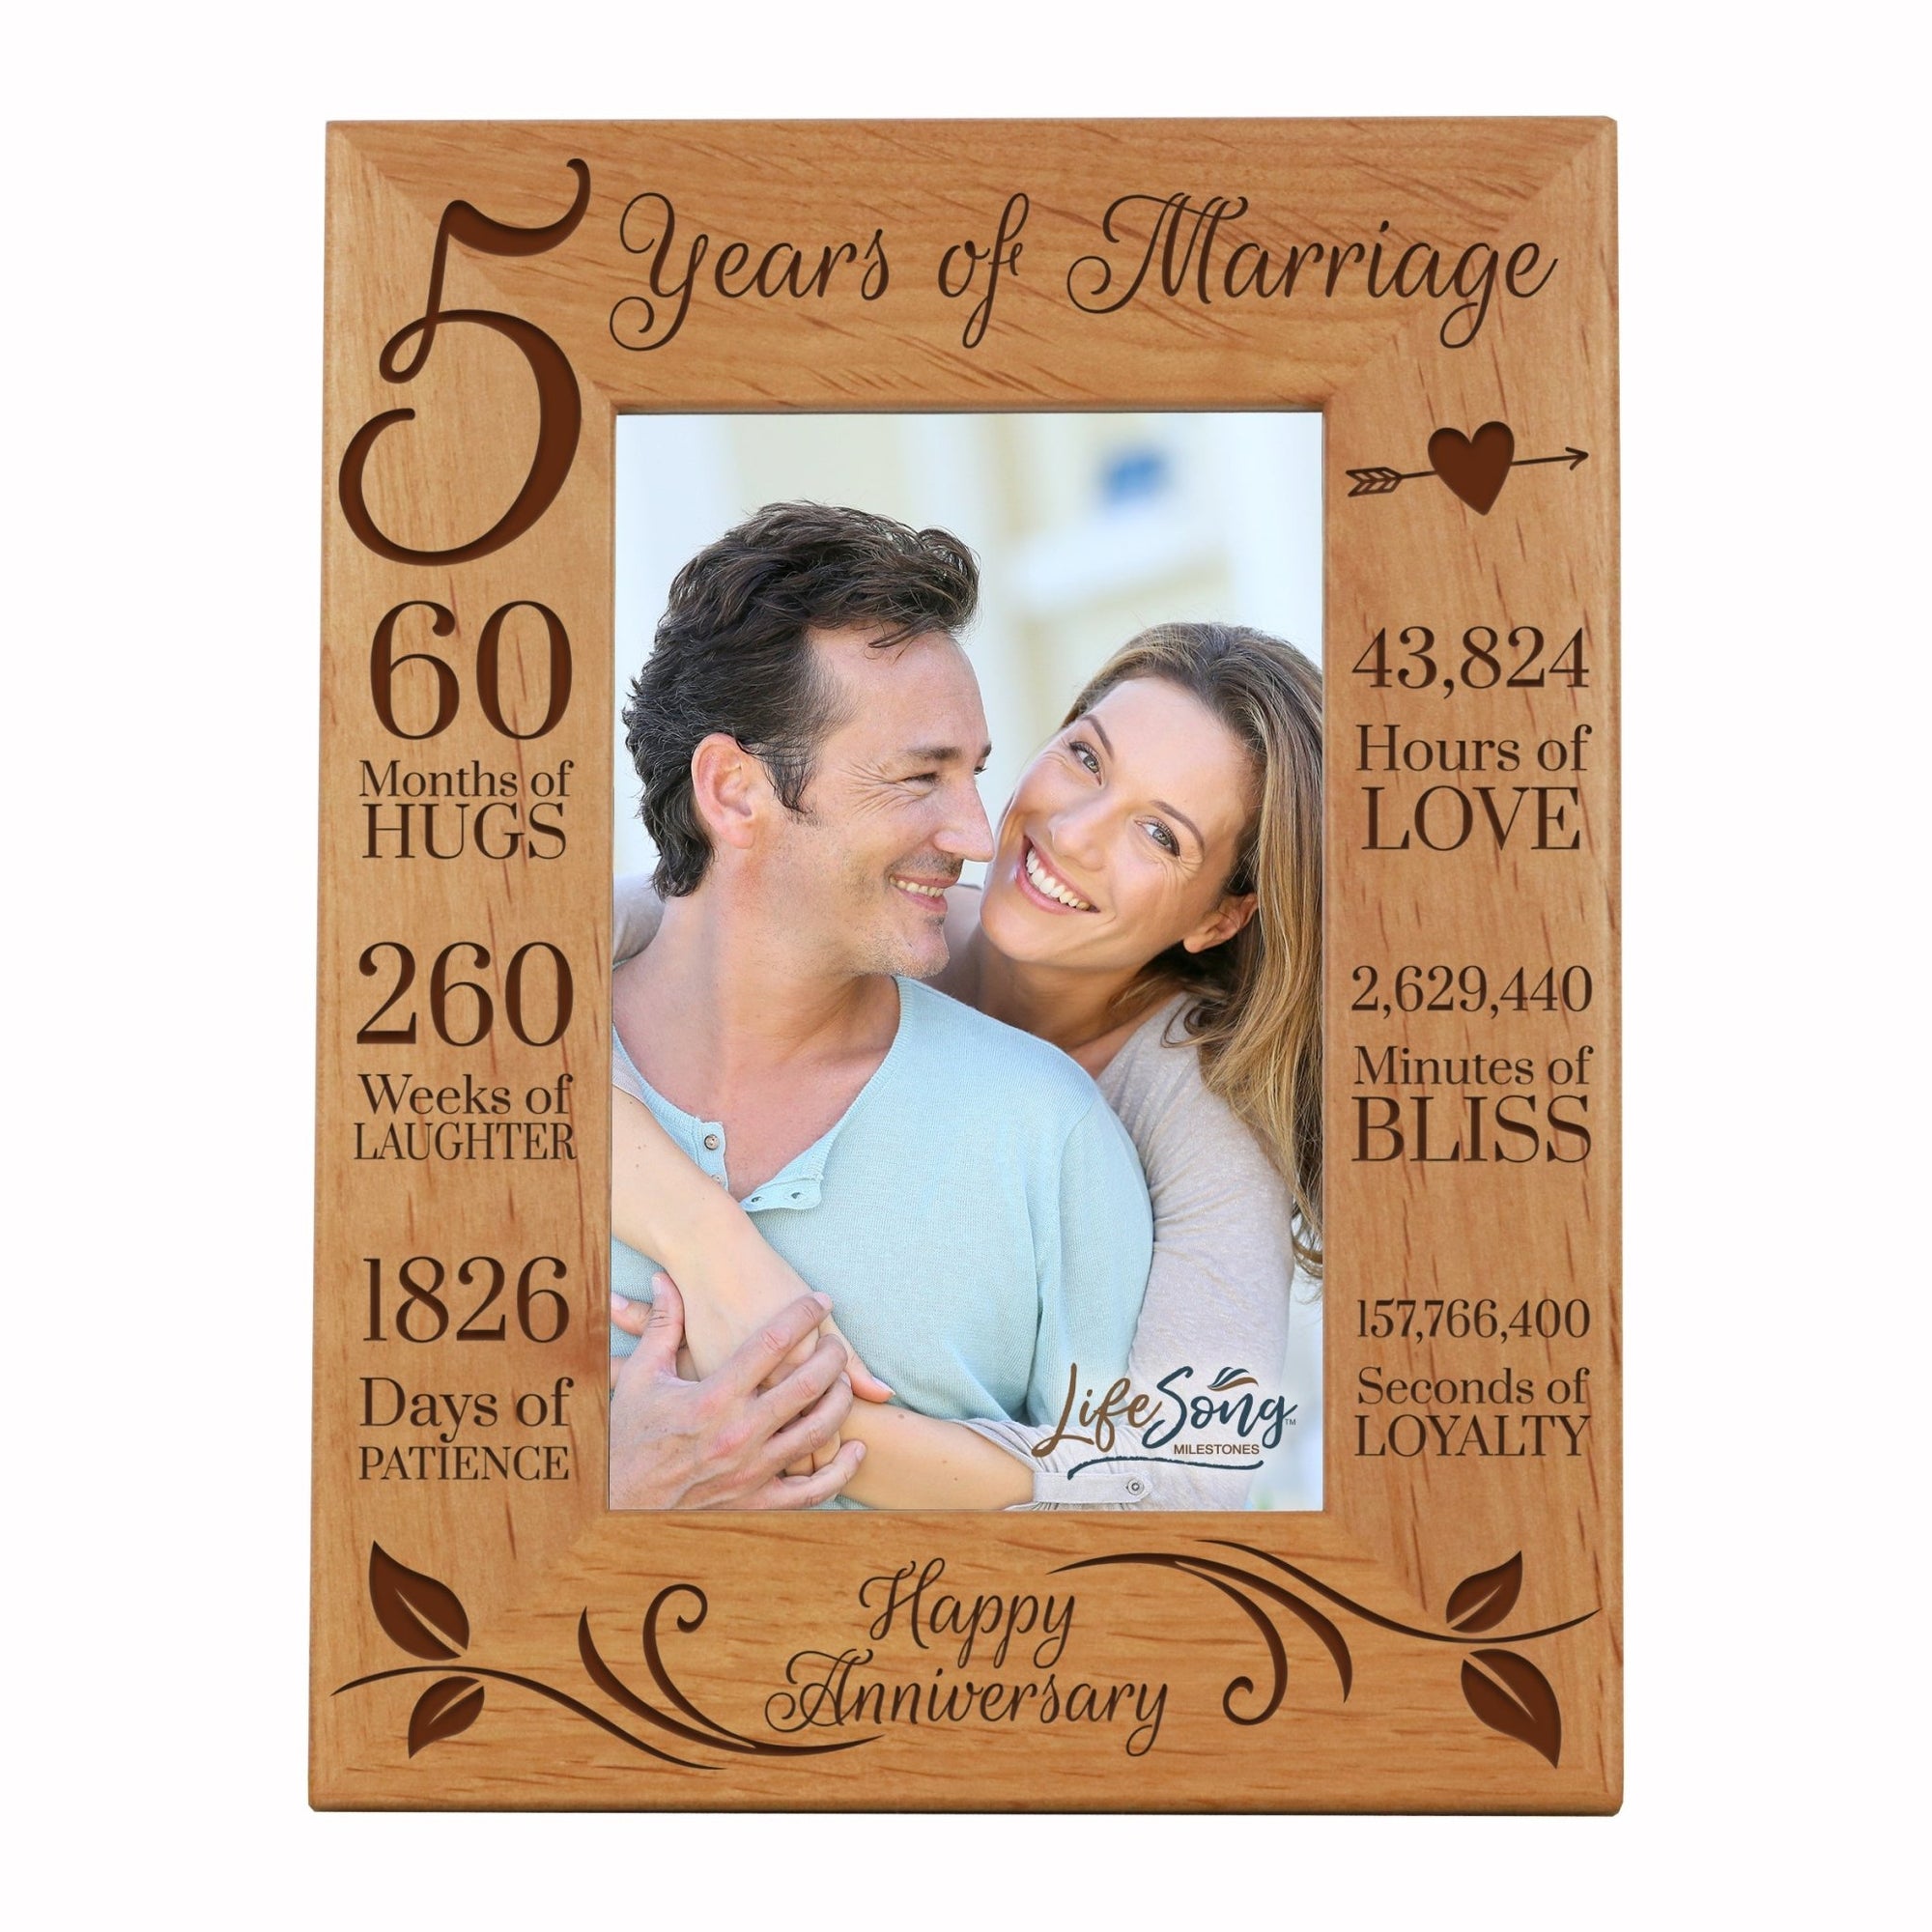 Lifesong Milestones Engraved 5th Anniversary Picture Frame Gift for Couples